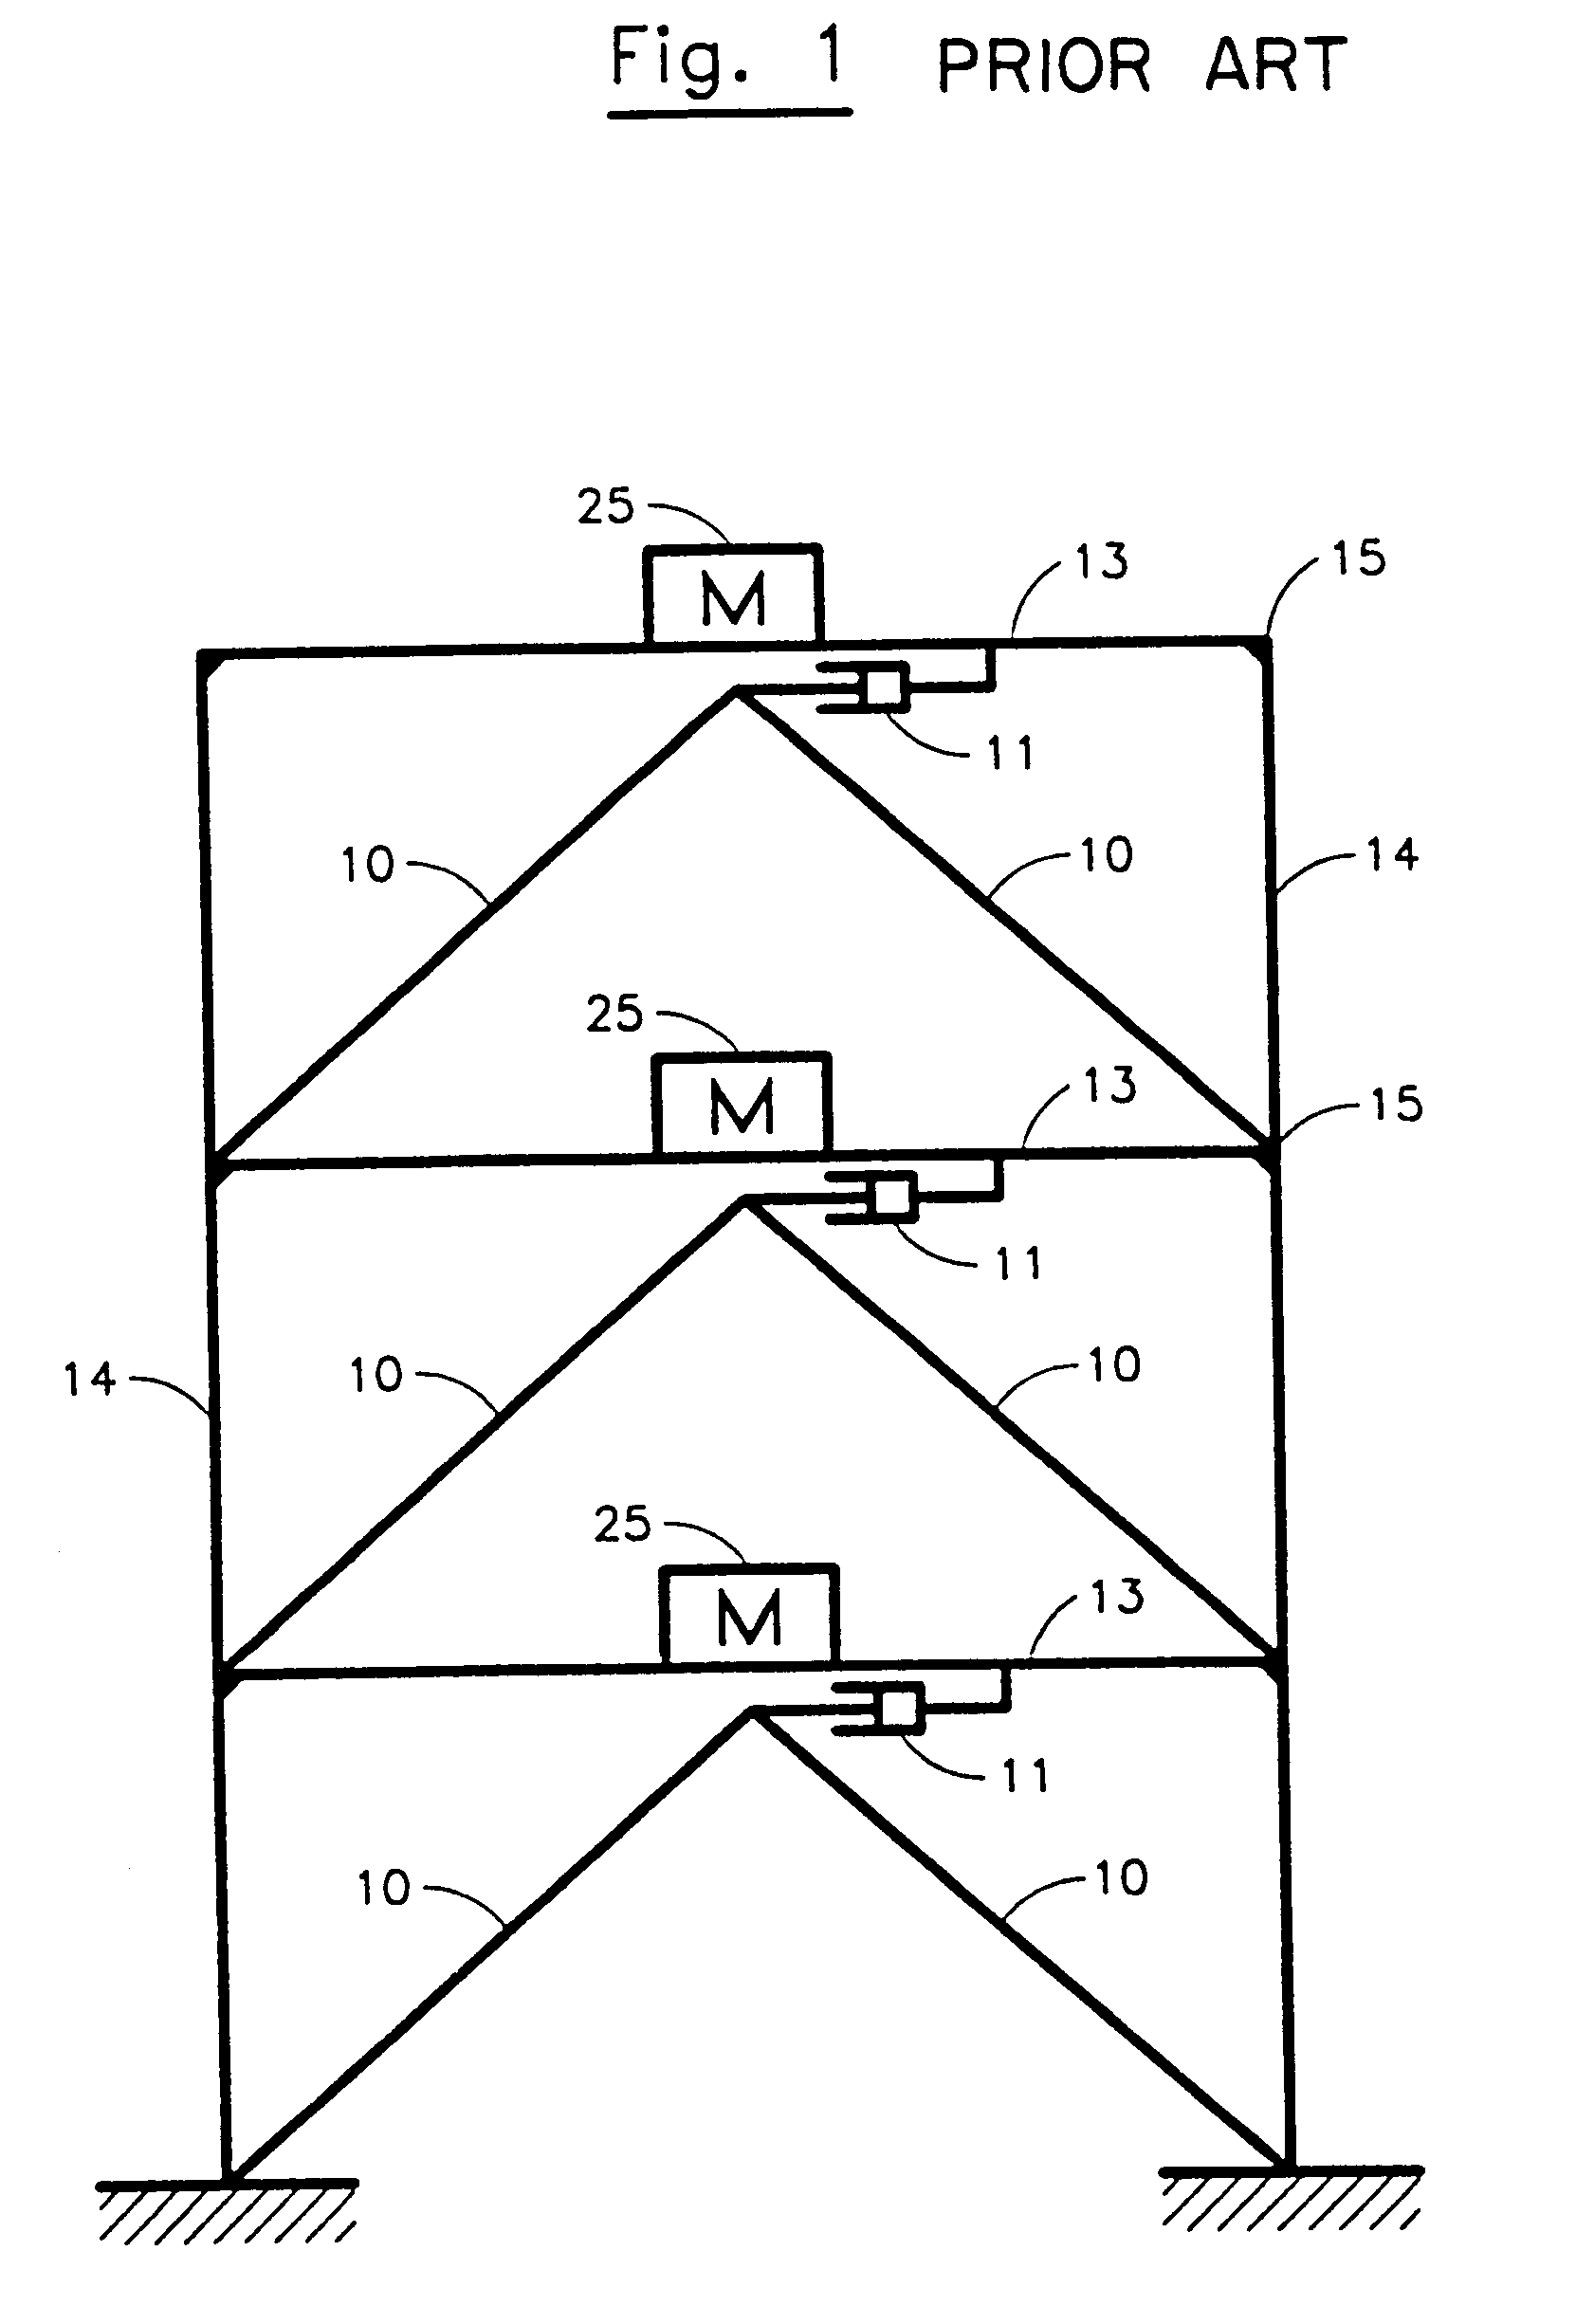 Method and apparatus to control seismic forces, accelerations, and displacements of structures